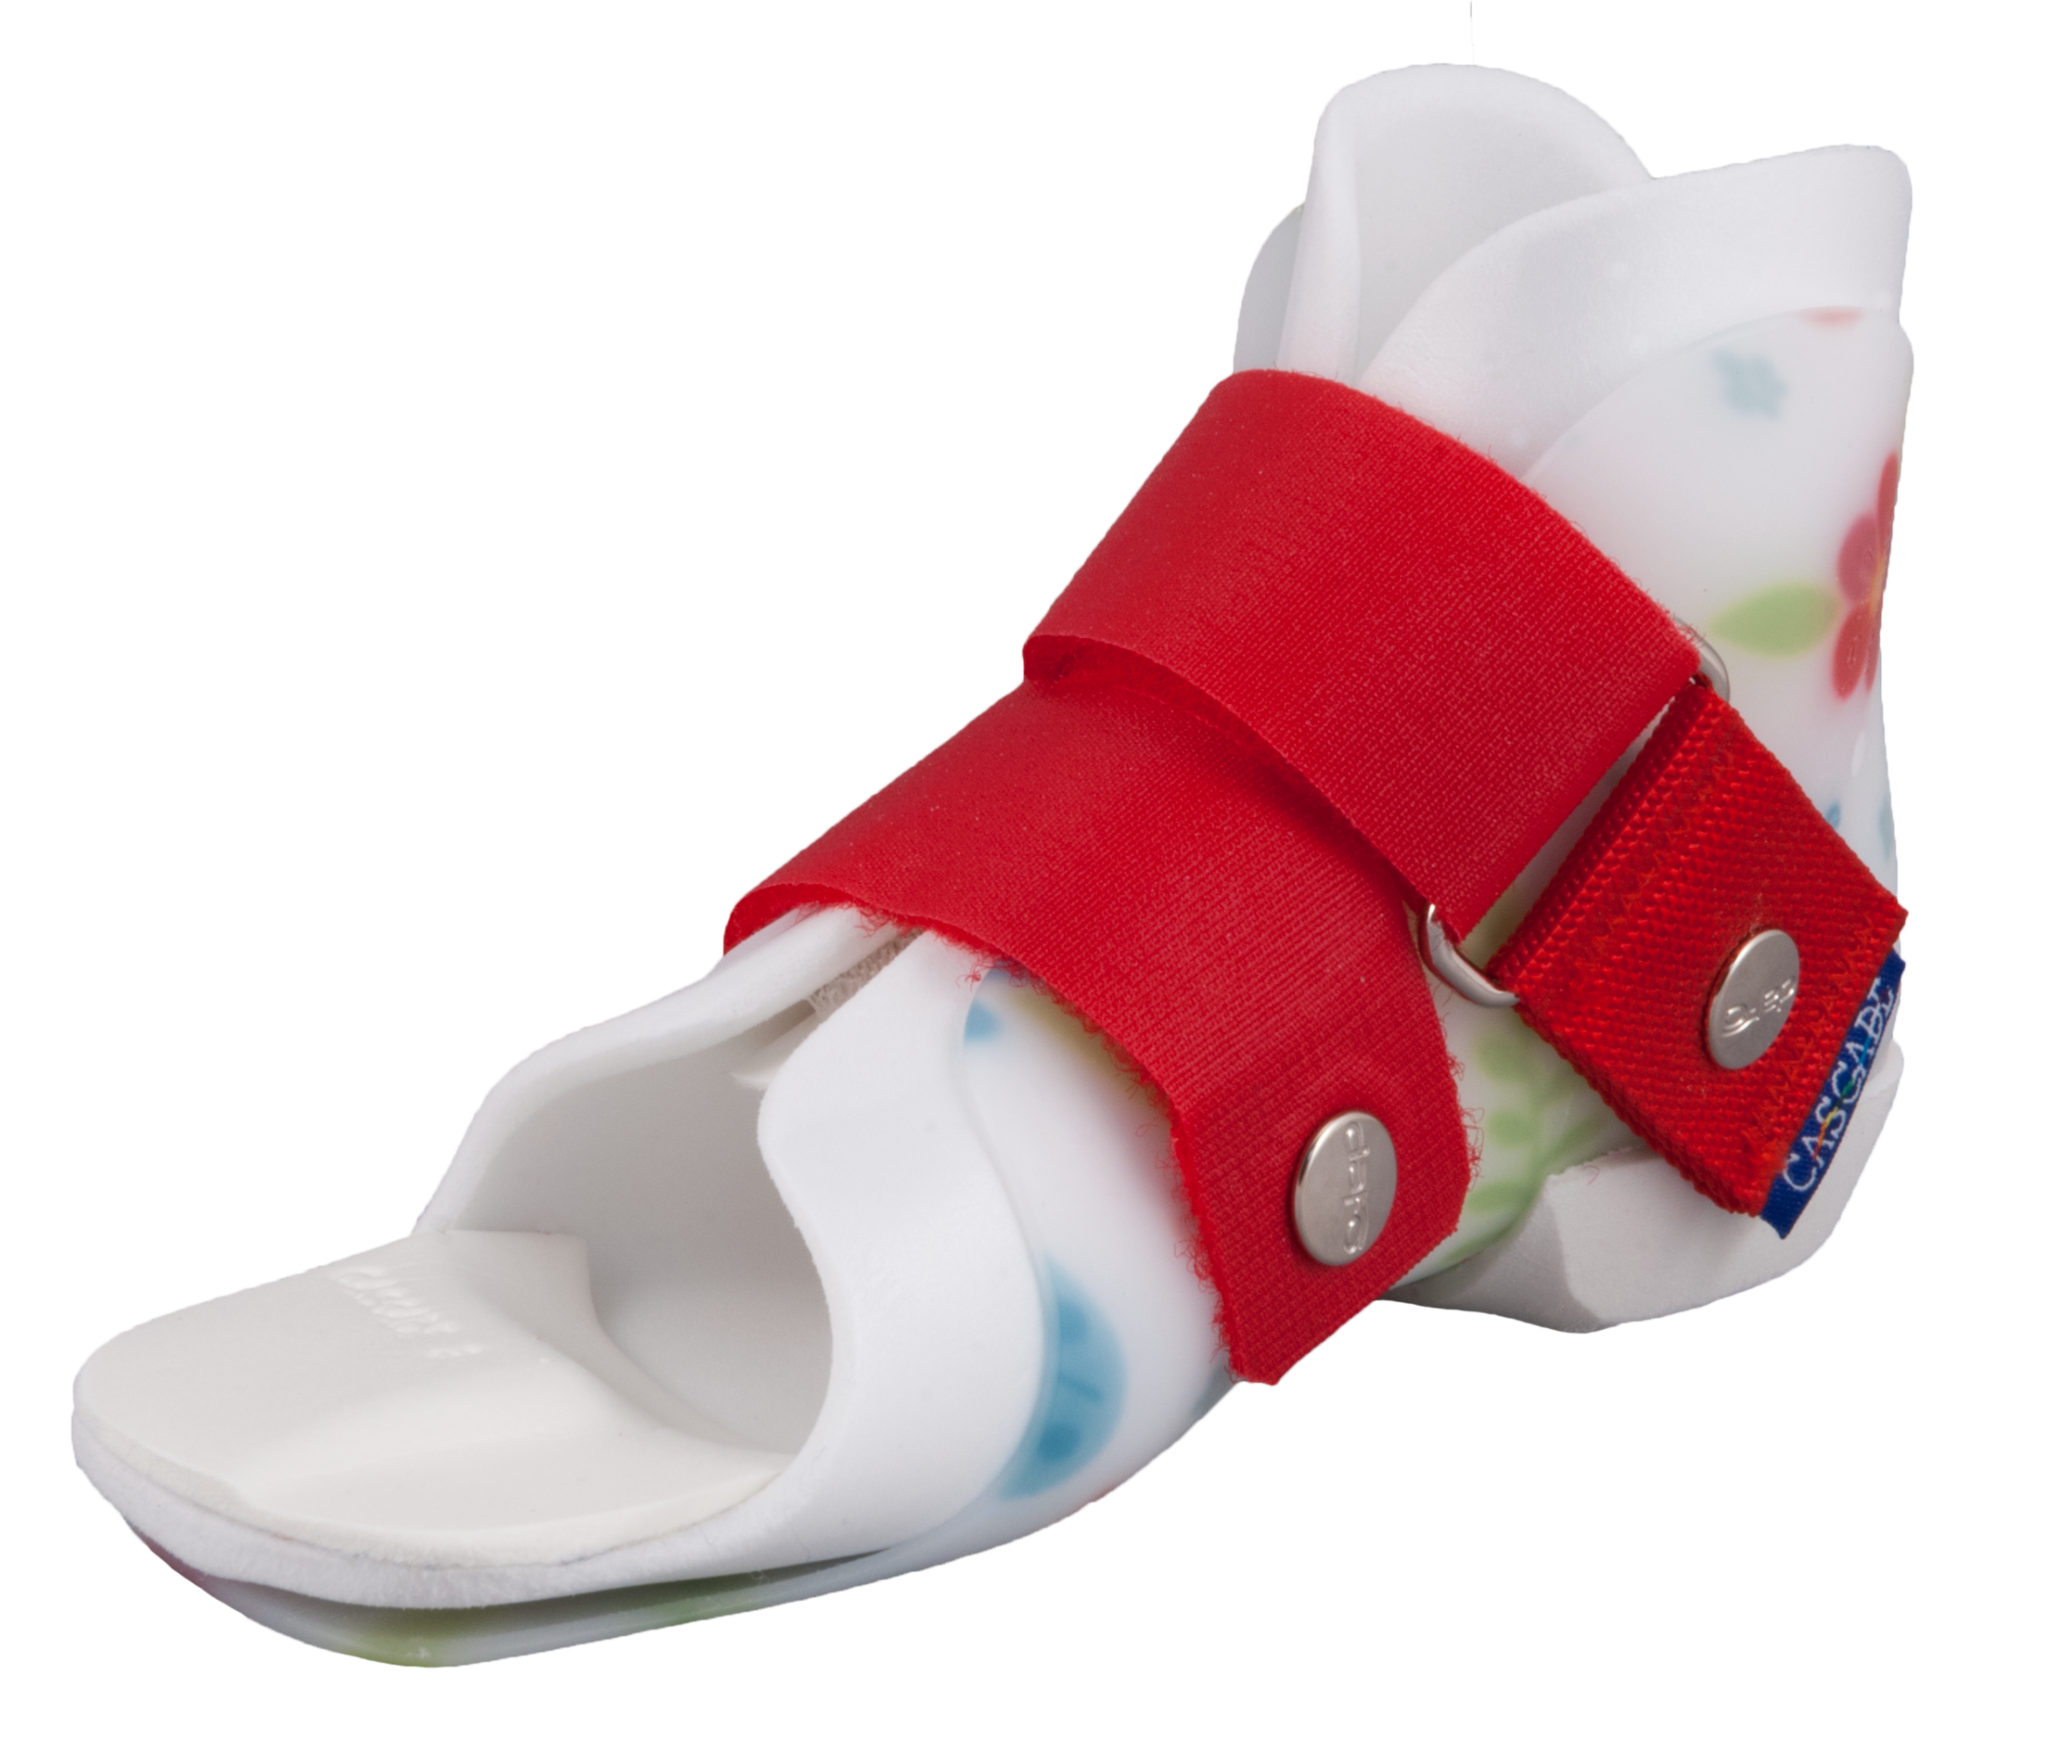 Supramalleolar Orthosis In Cascade Dafo Style 4 with Softy